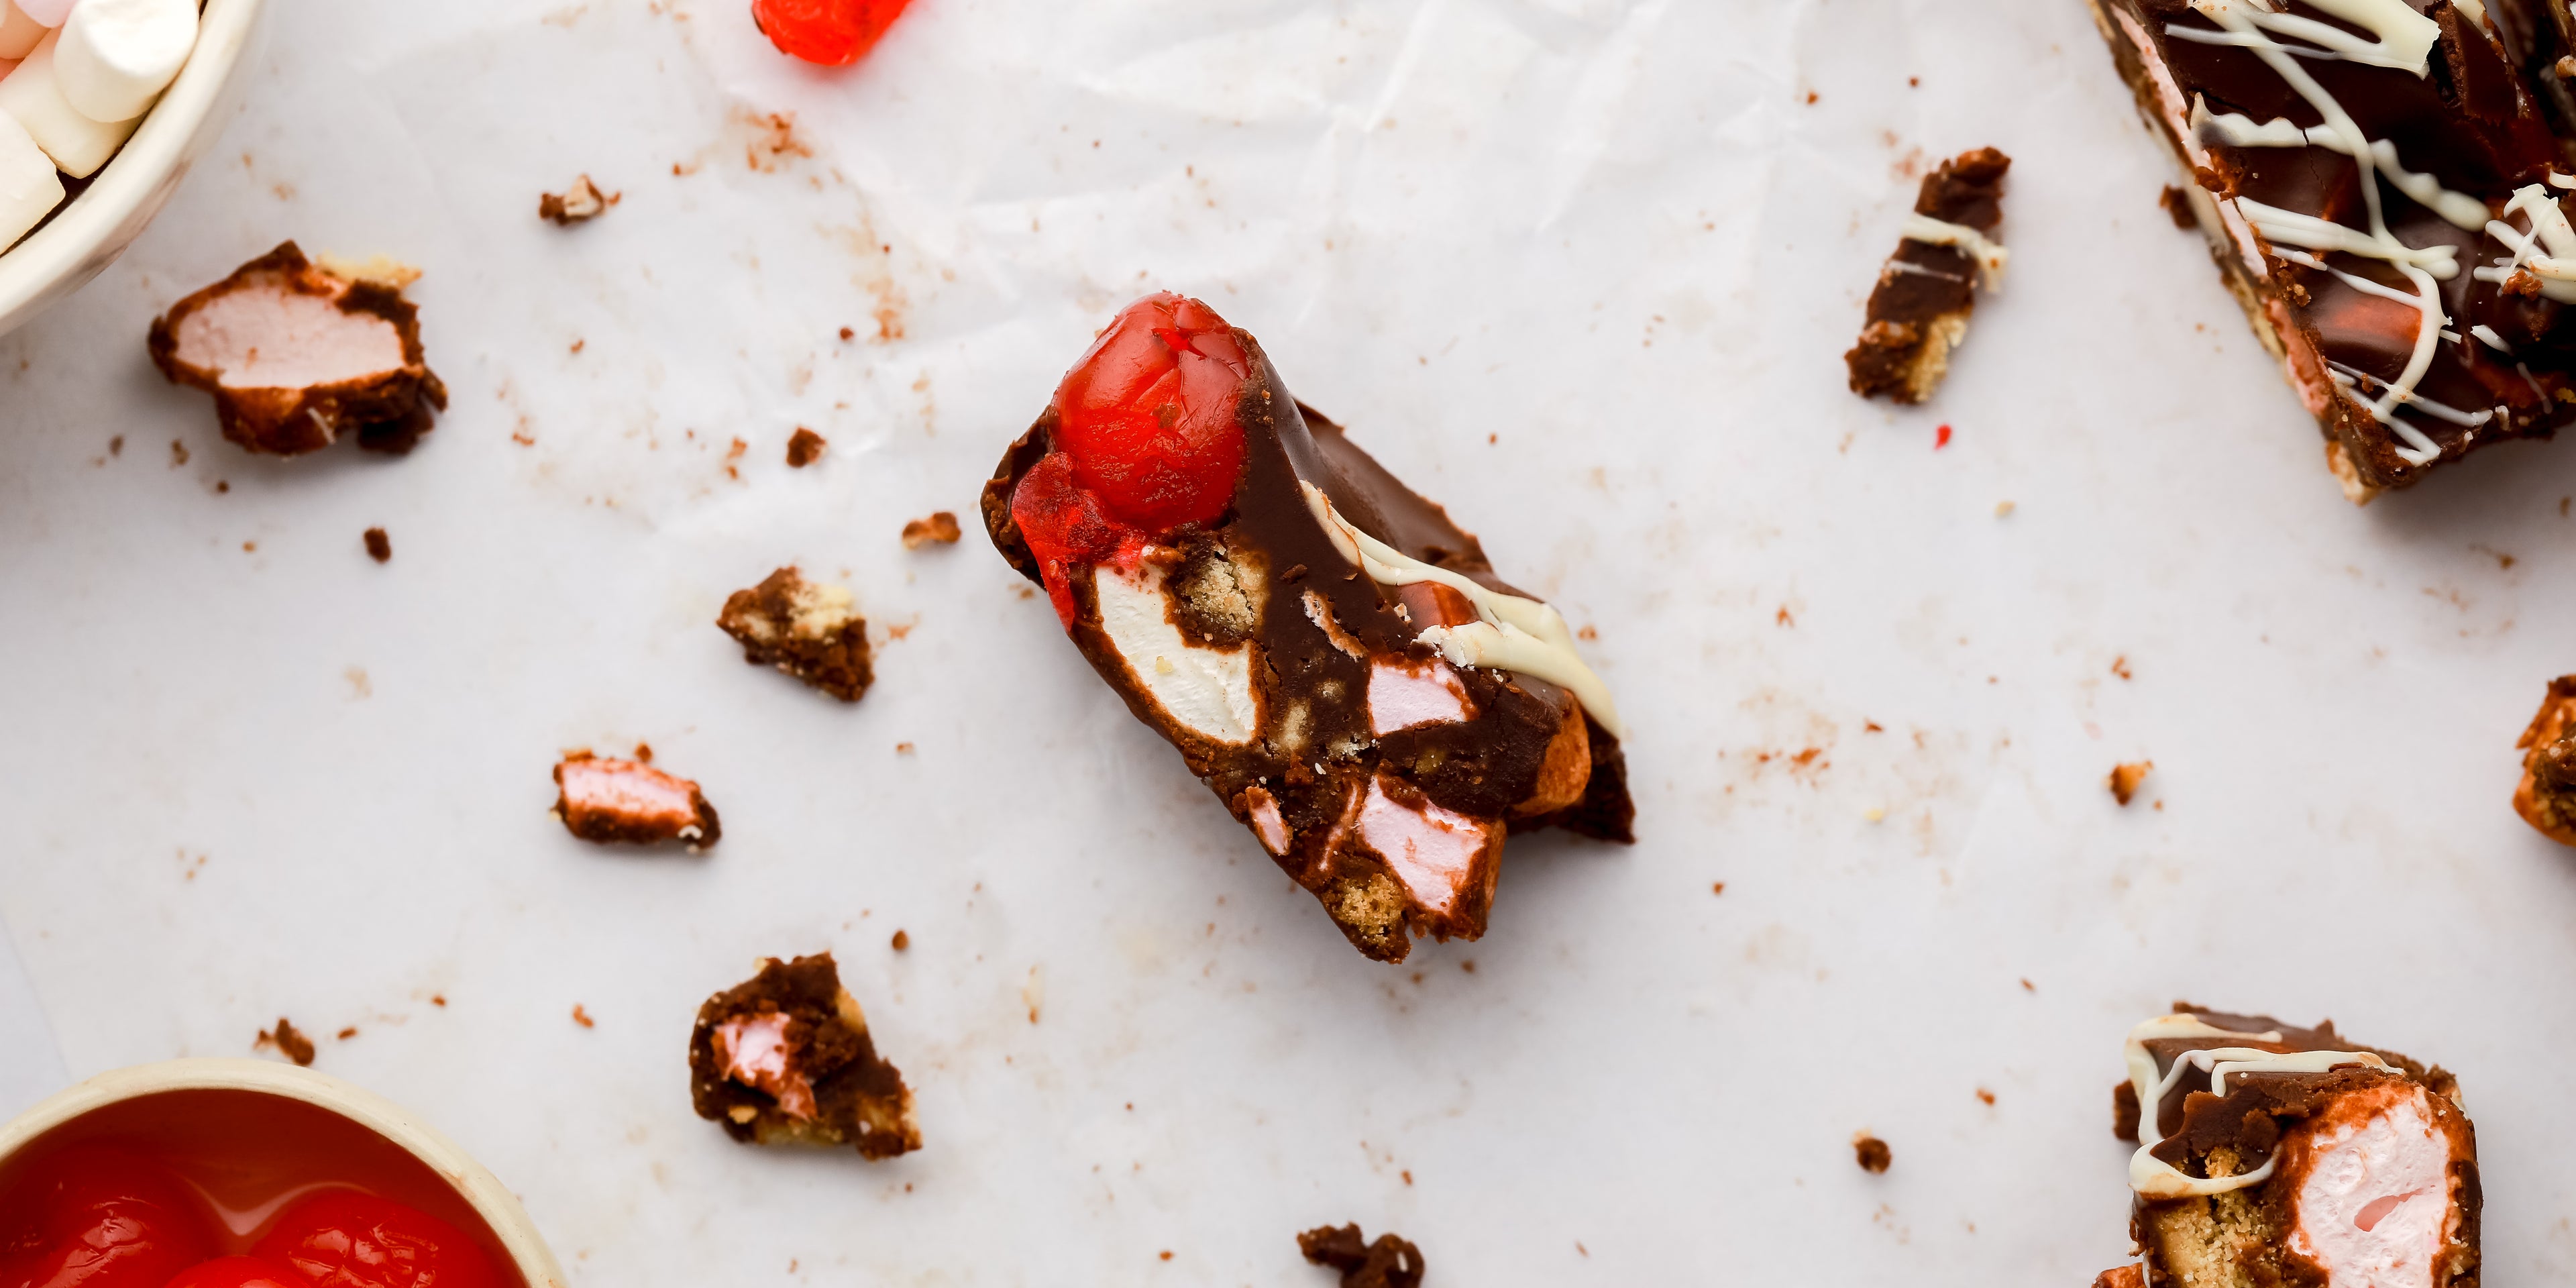 Slice of rocky road with a bite taken out